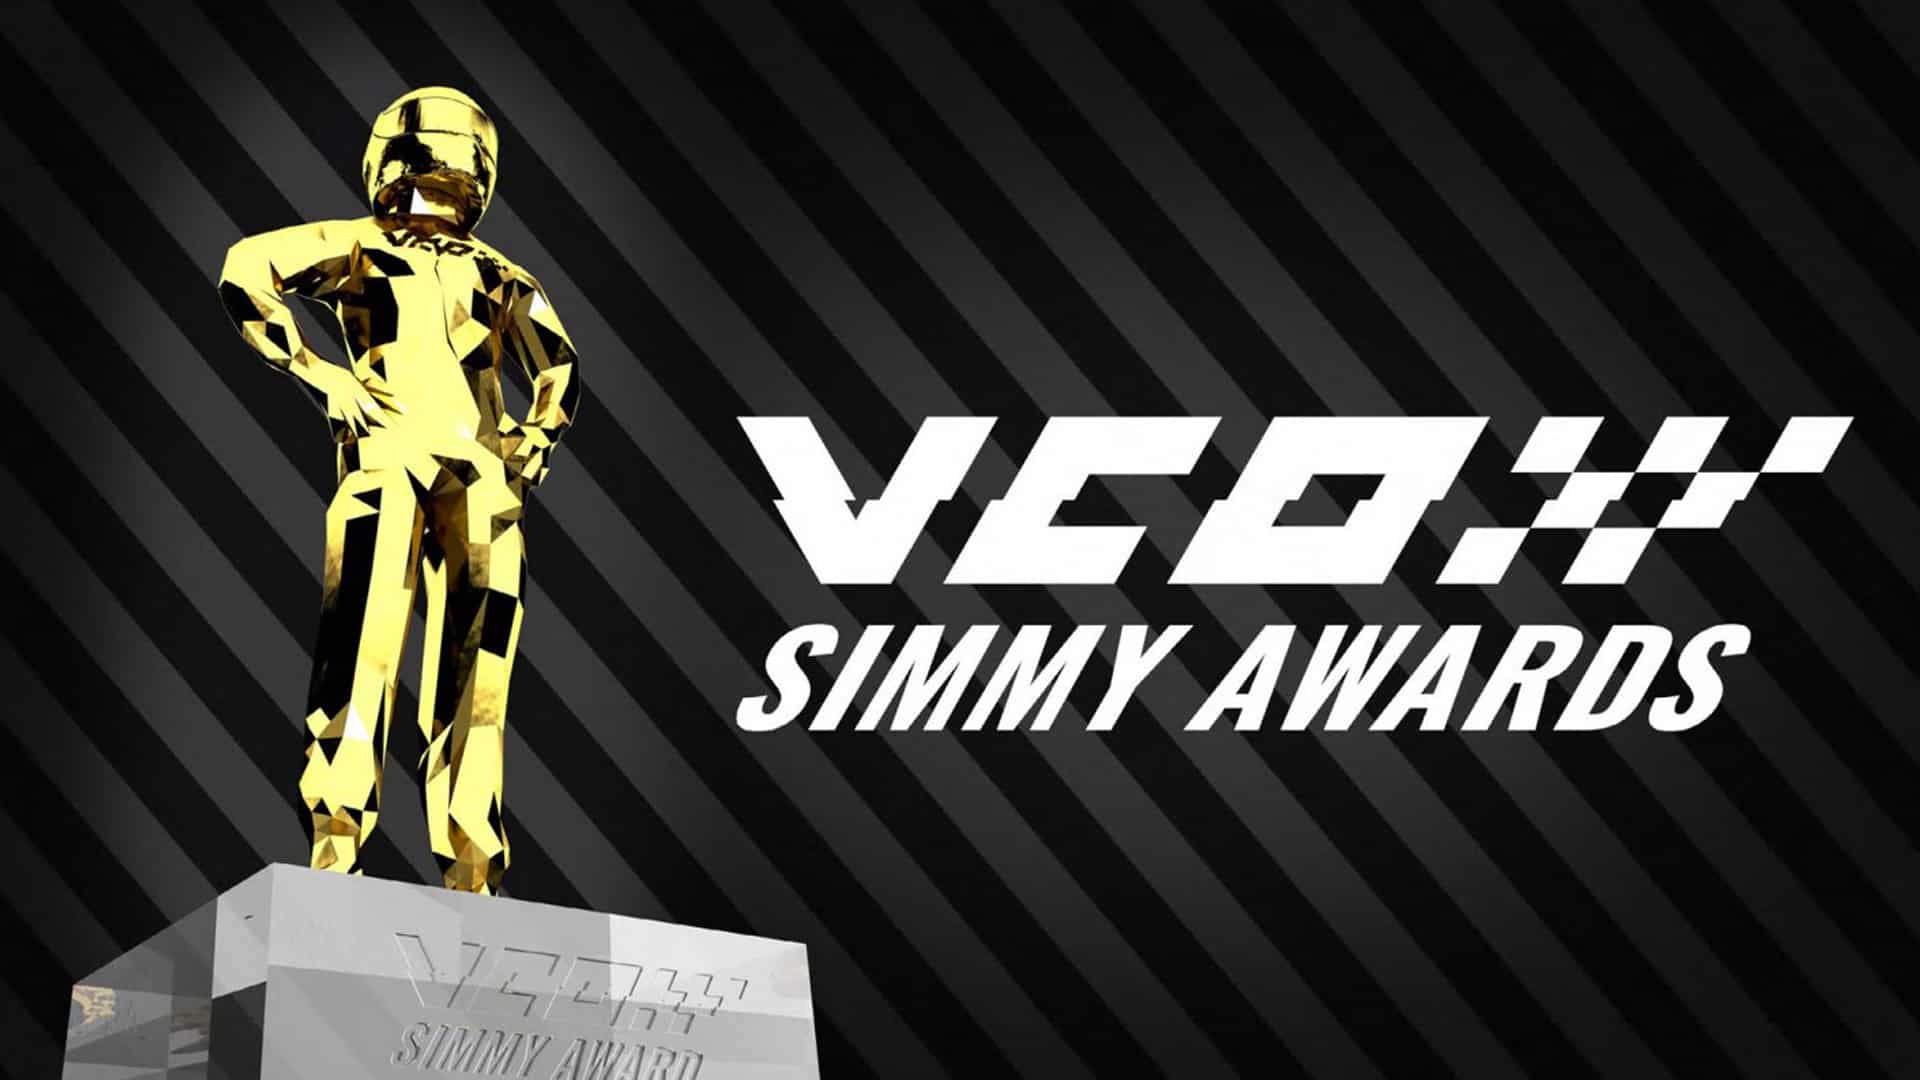 Not much time left to submit nominations for 2022 VCO Simmy Awards